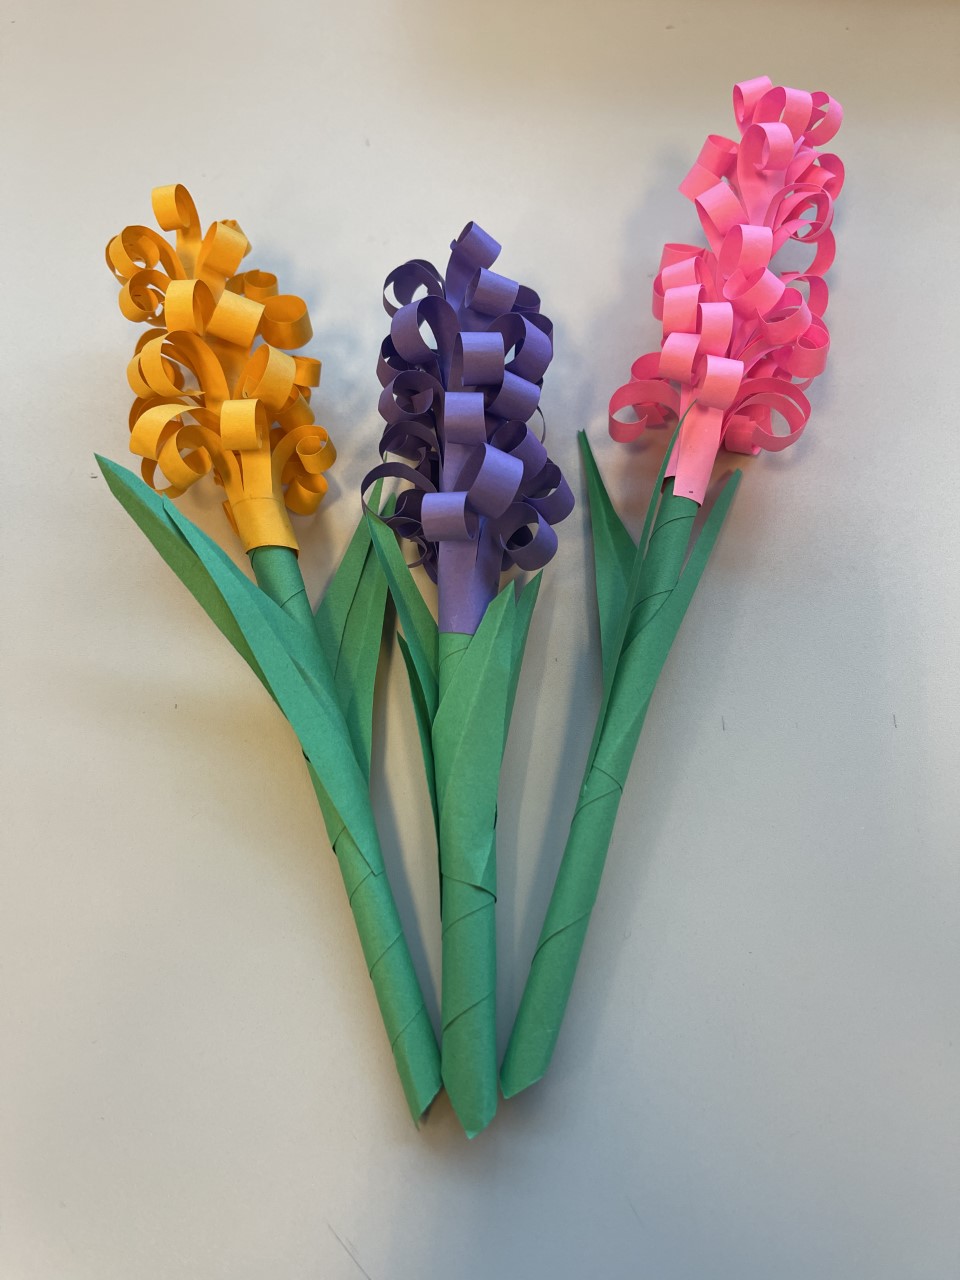 One yellow, one purple, and one pink paper hyacinth flowers. 